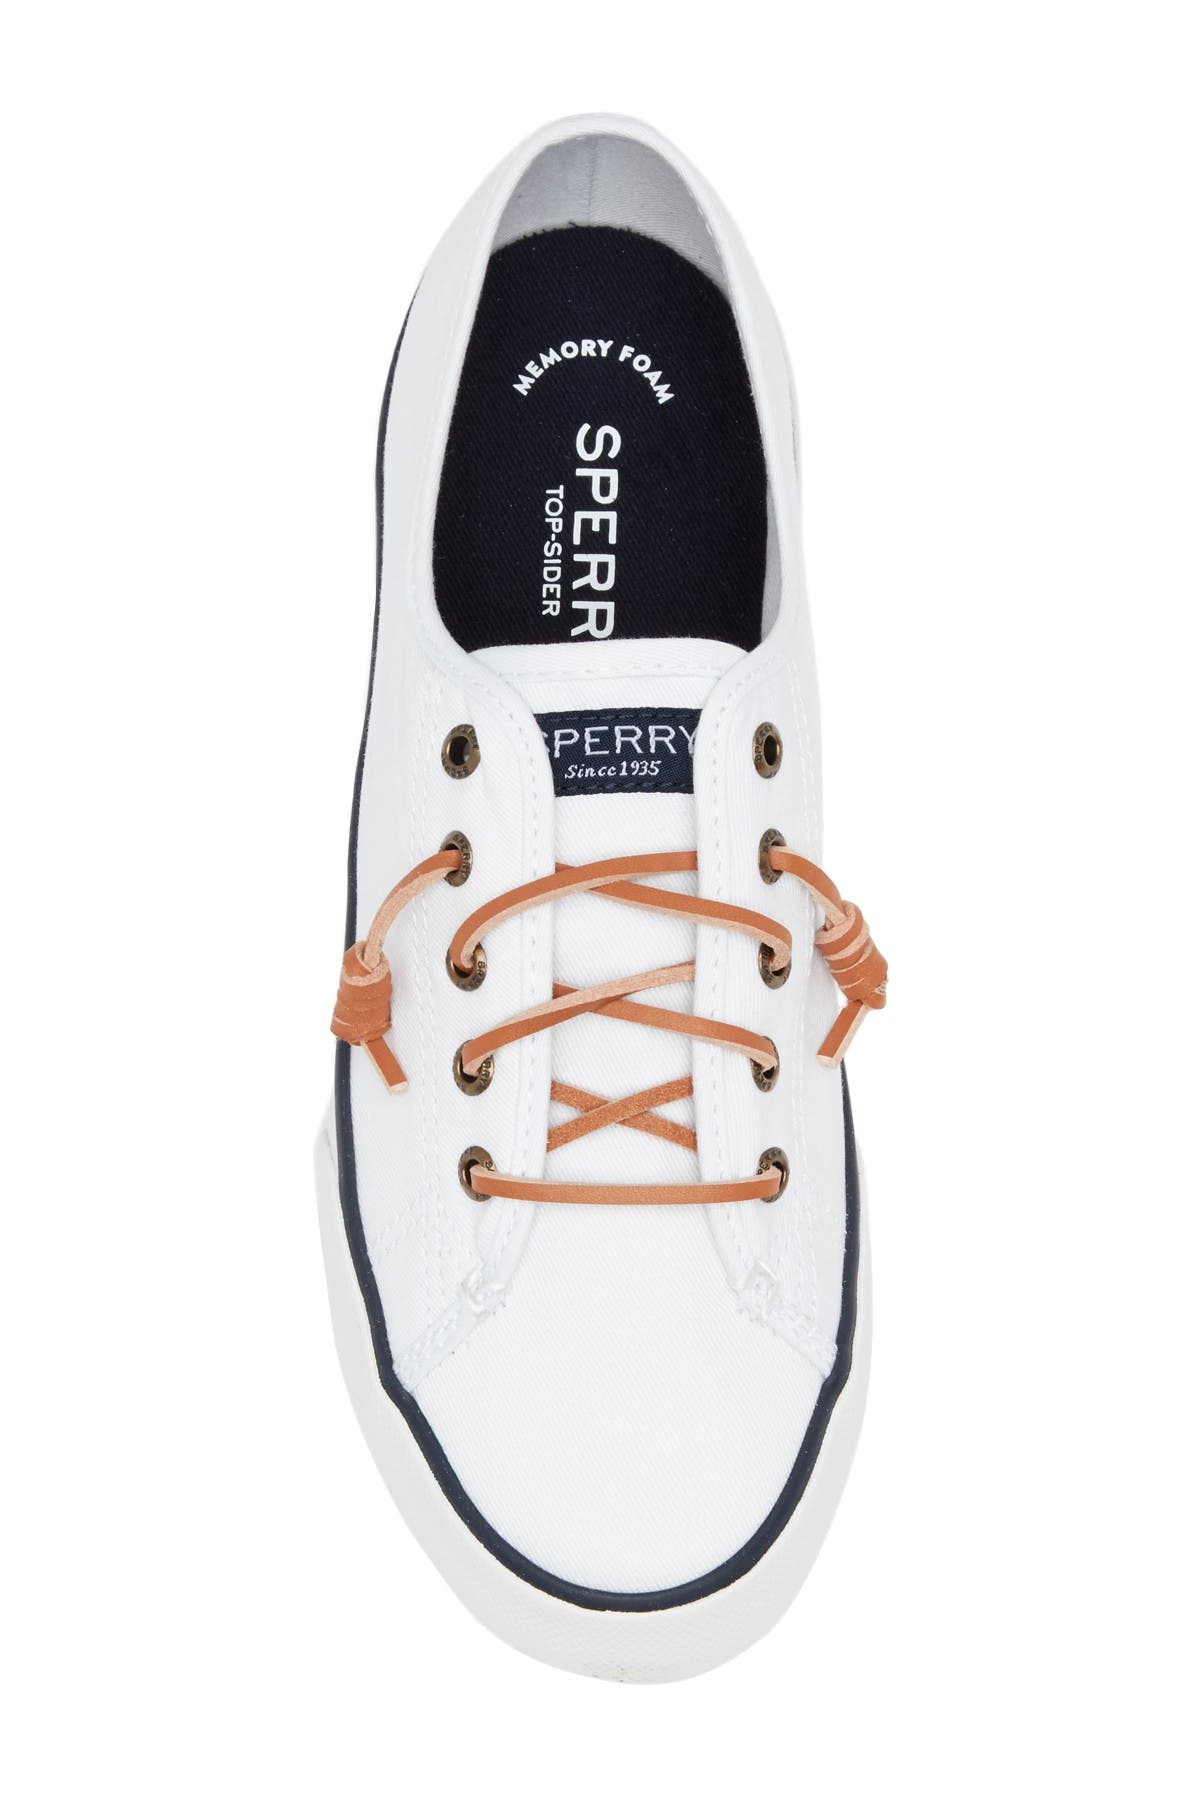 pier view core white sperry